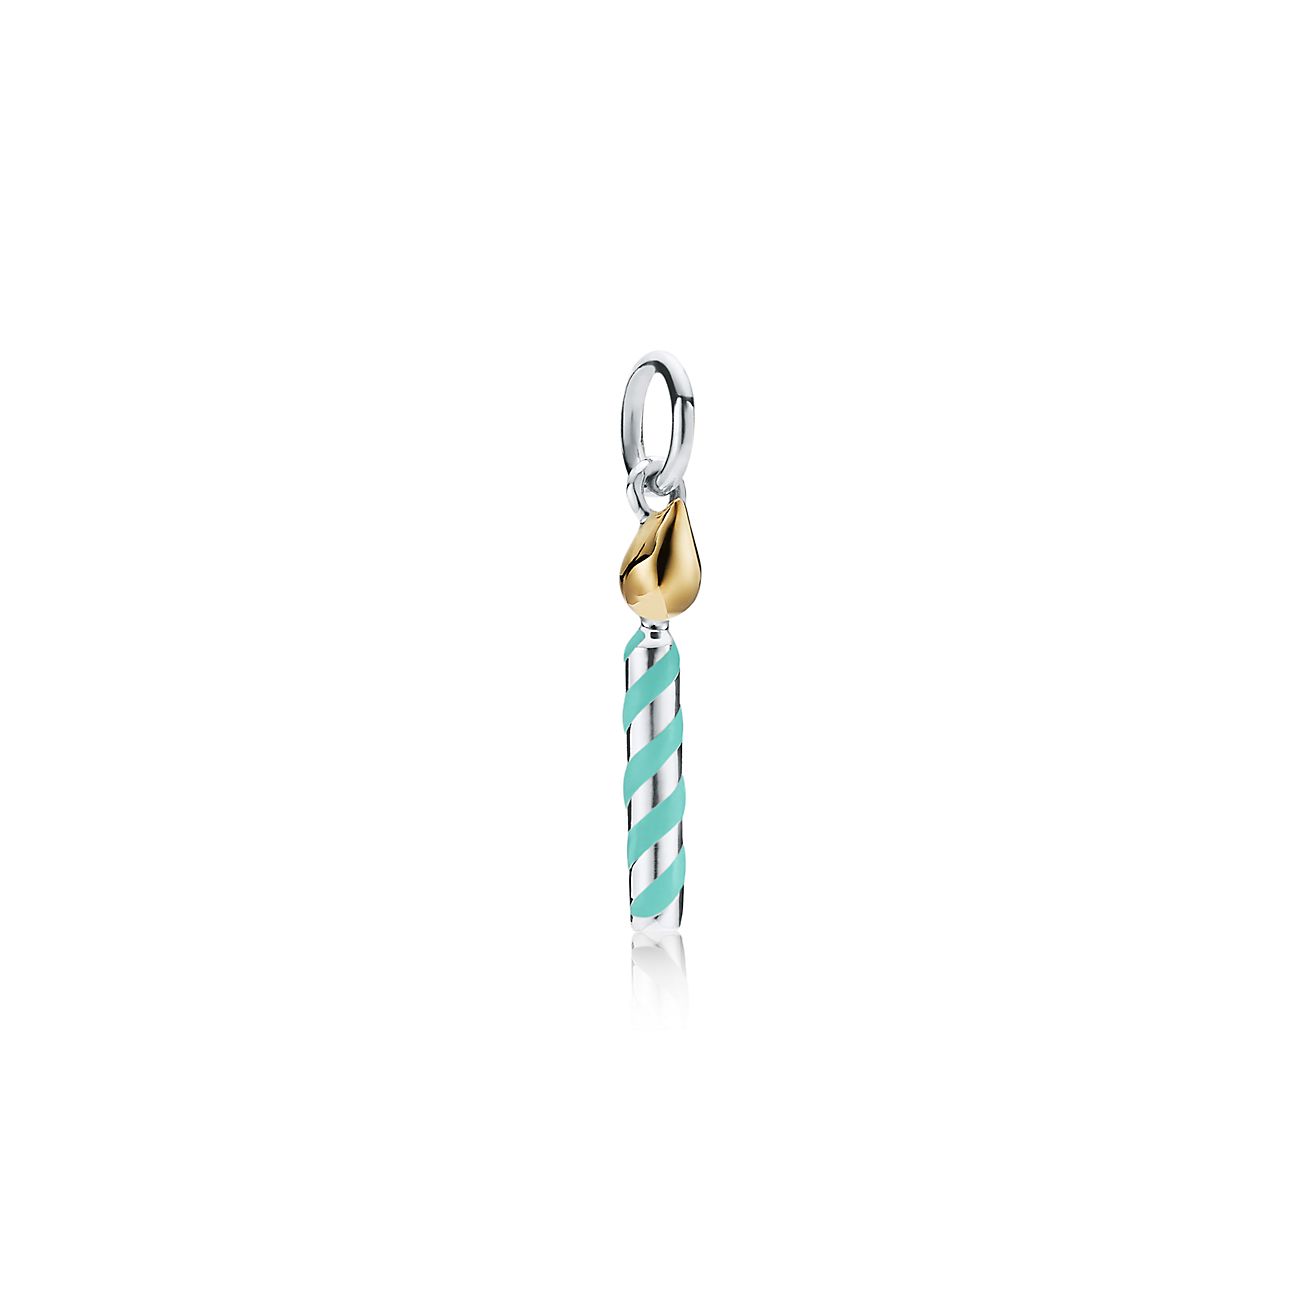 Tiffany Charms birthday candle charm in 